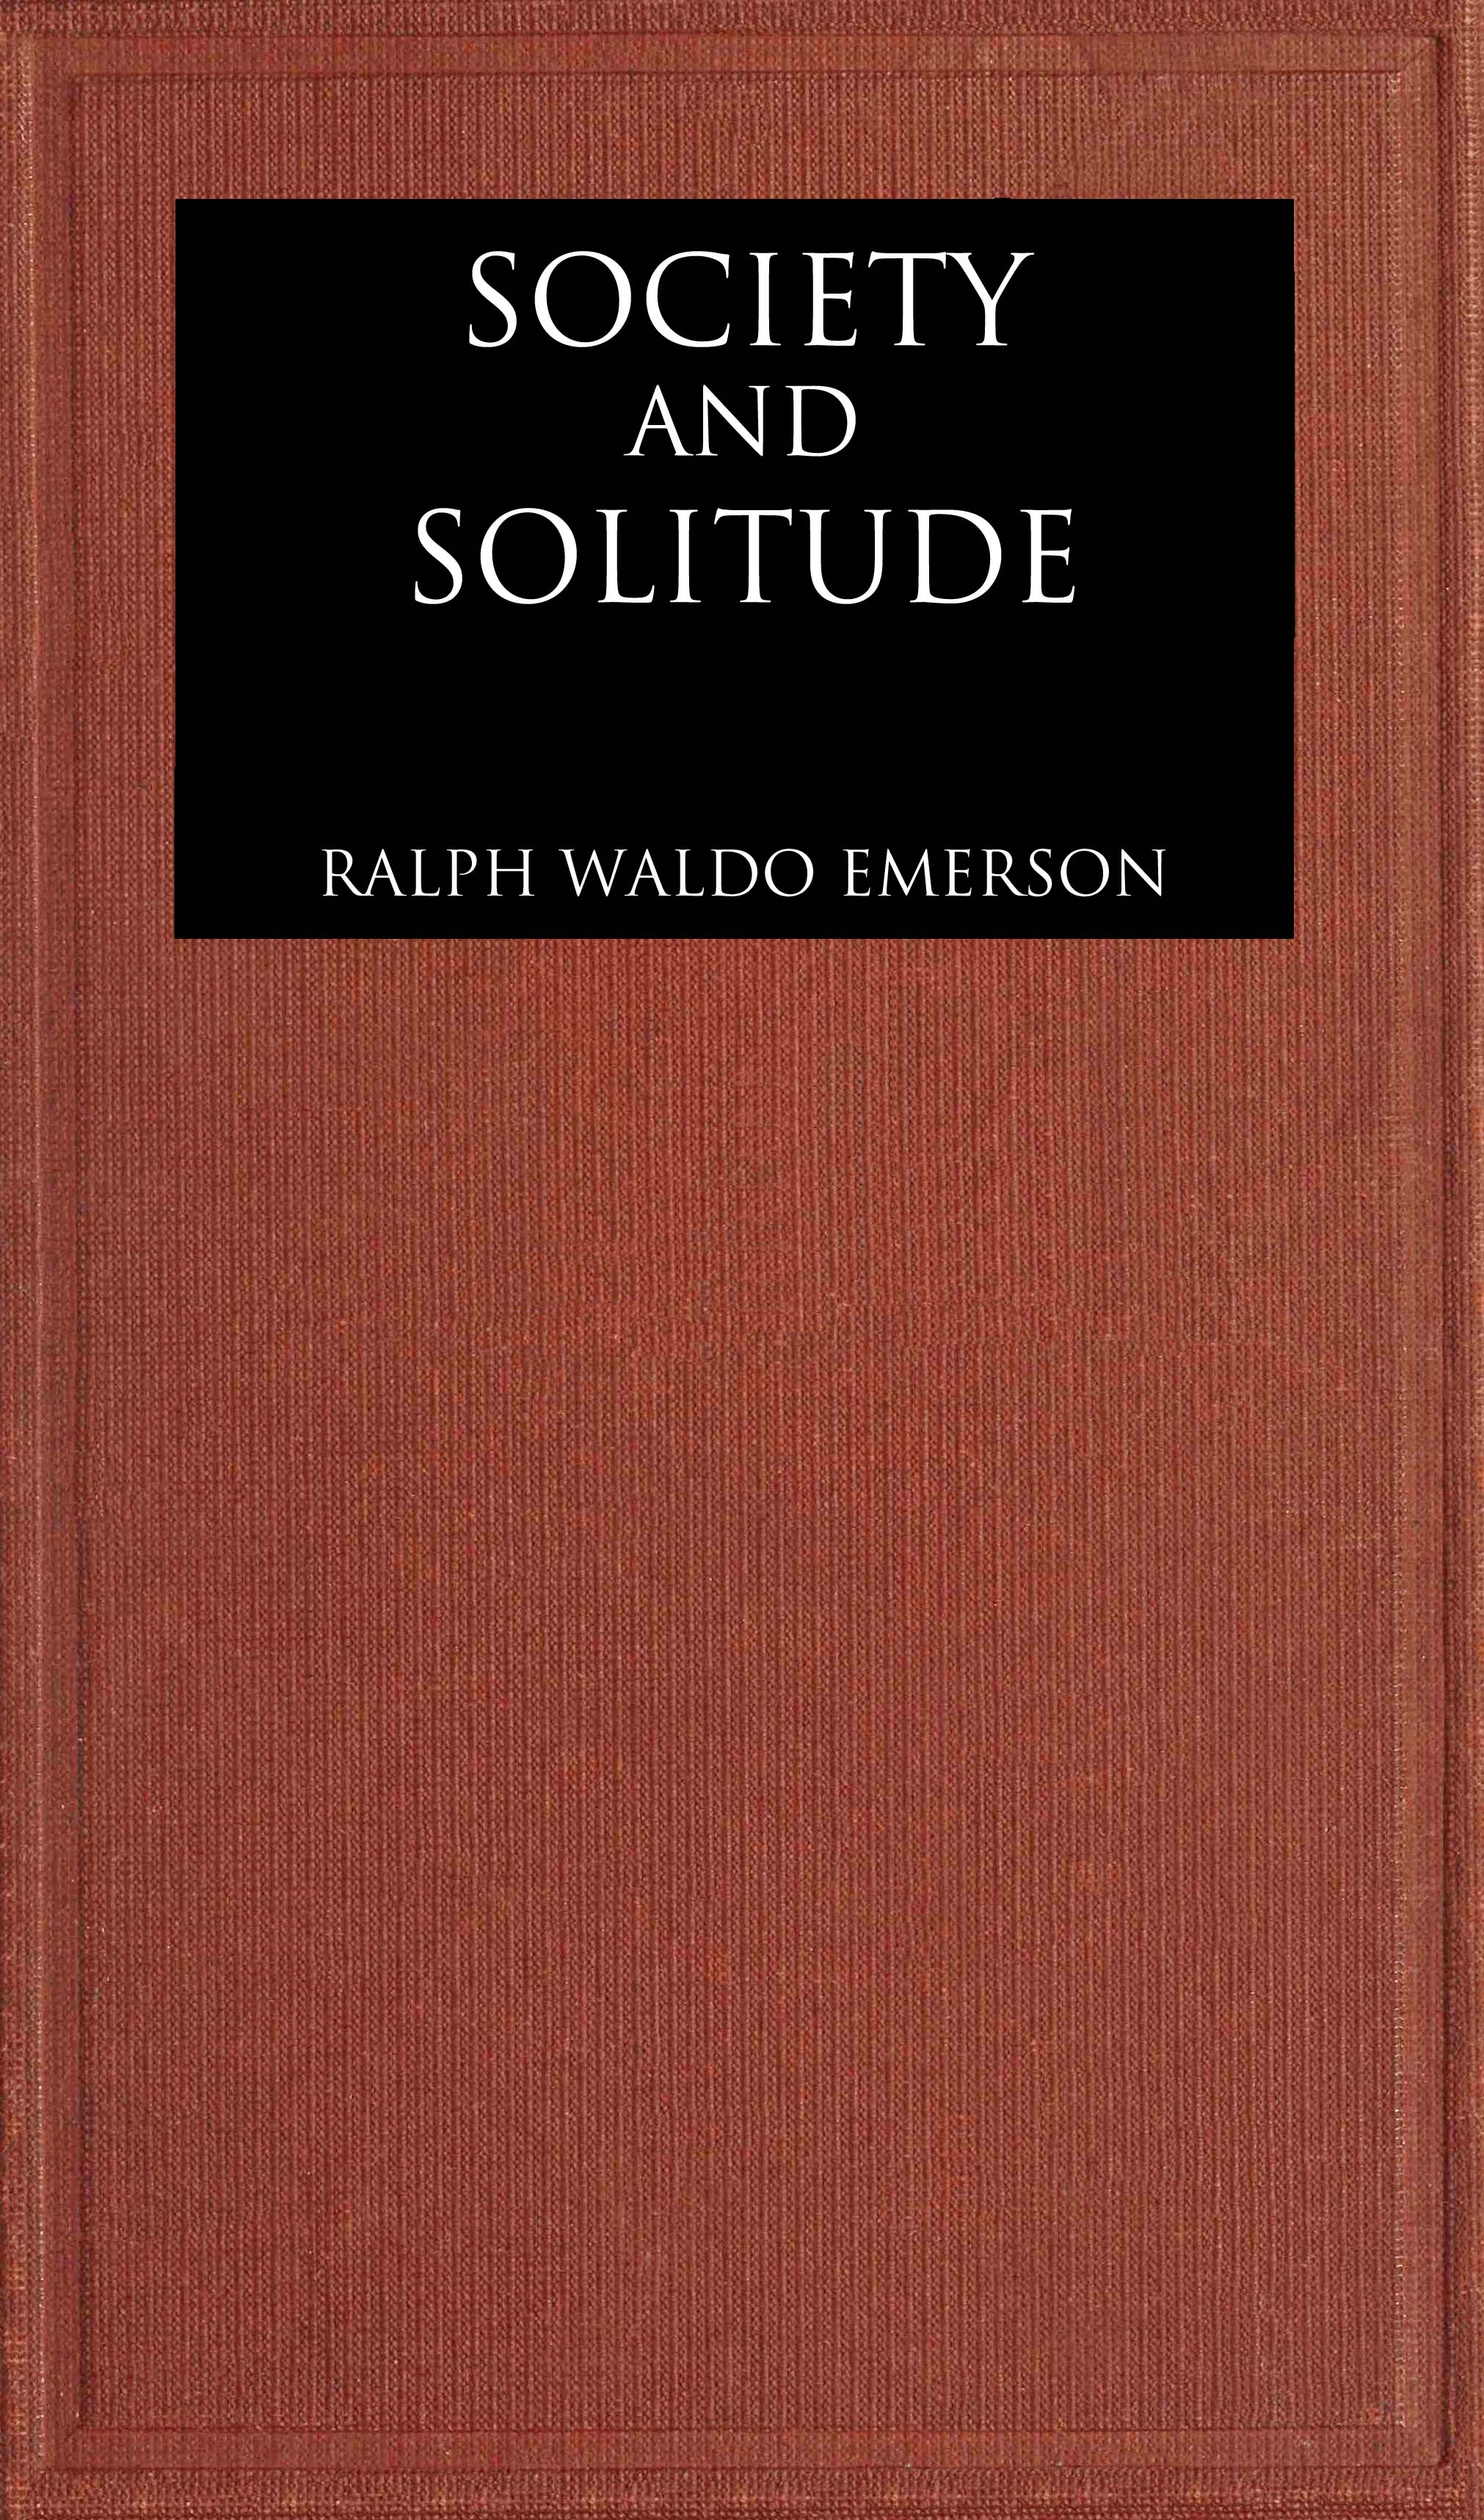 Society and solitude: Twelve chapters